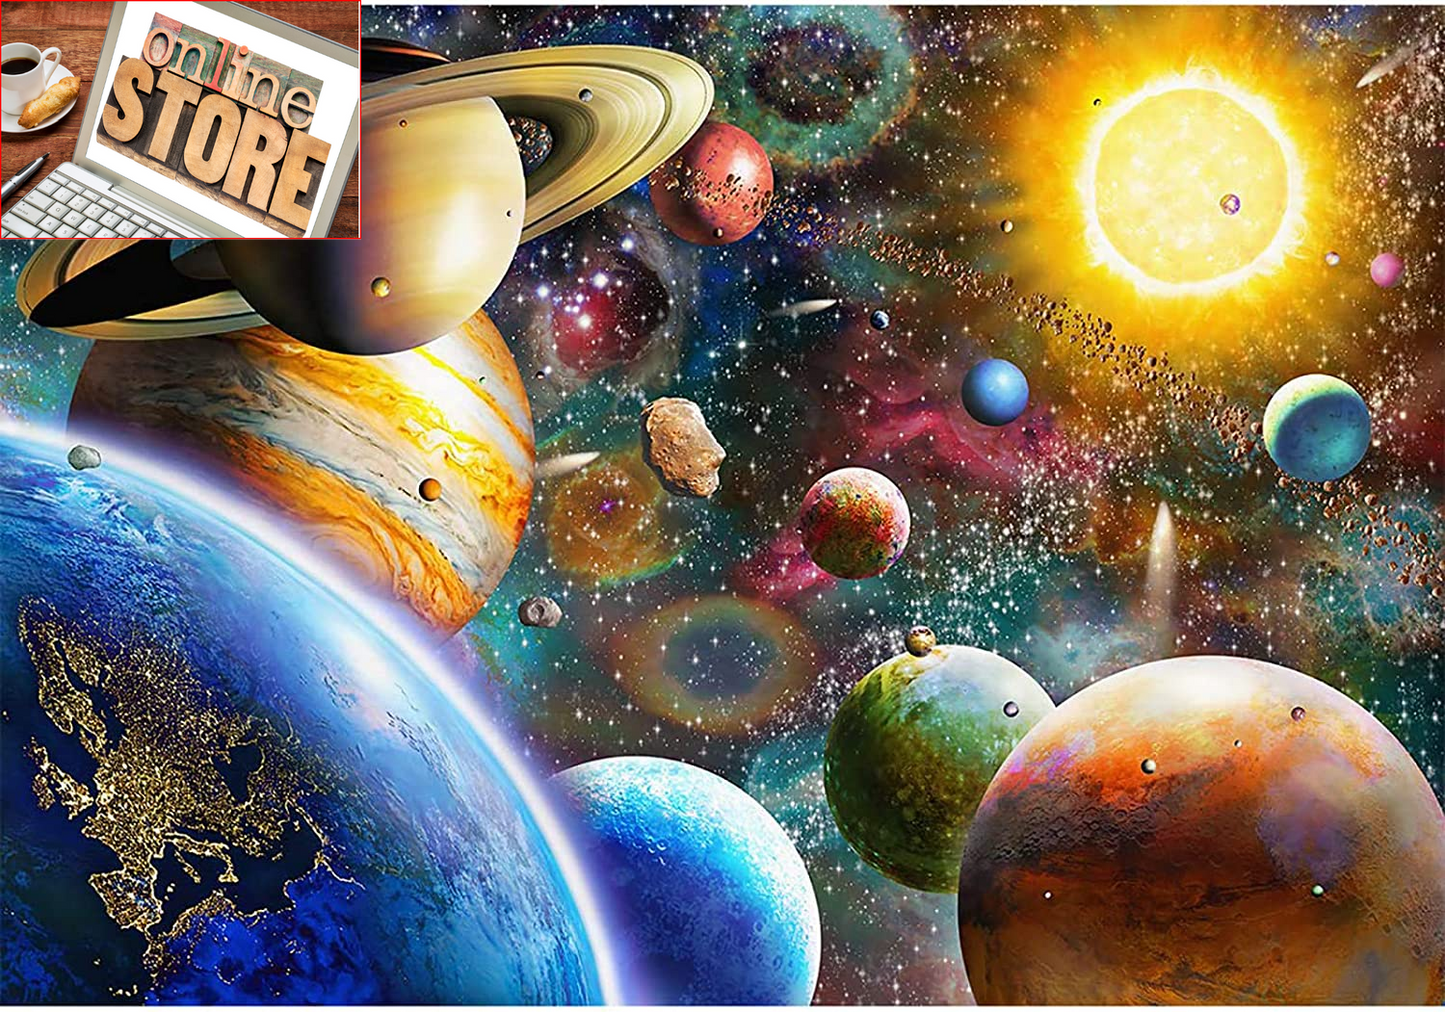 Jigsaw Puzzles 1000 Pieces for Adults (Space Traveler, Solar System)